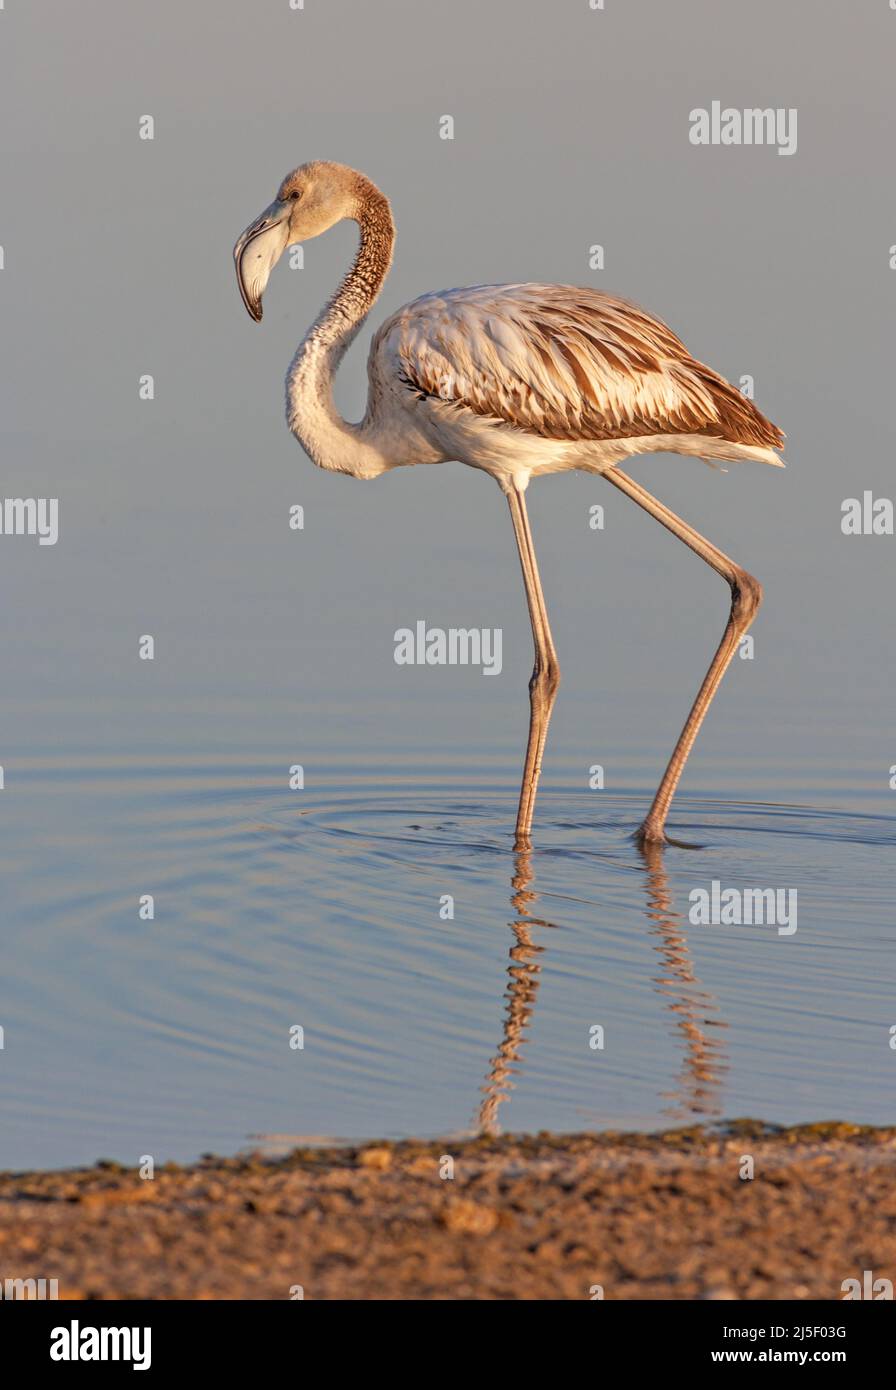 A juvenile greater flamingo (Phoenicopterus roseus) photographed at the Al Wasit Wetland Nature Reserve in Sharjah in the United Arab Emirates. Stock Photo